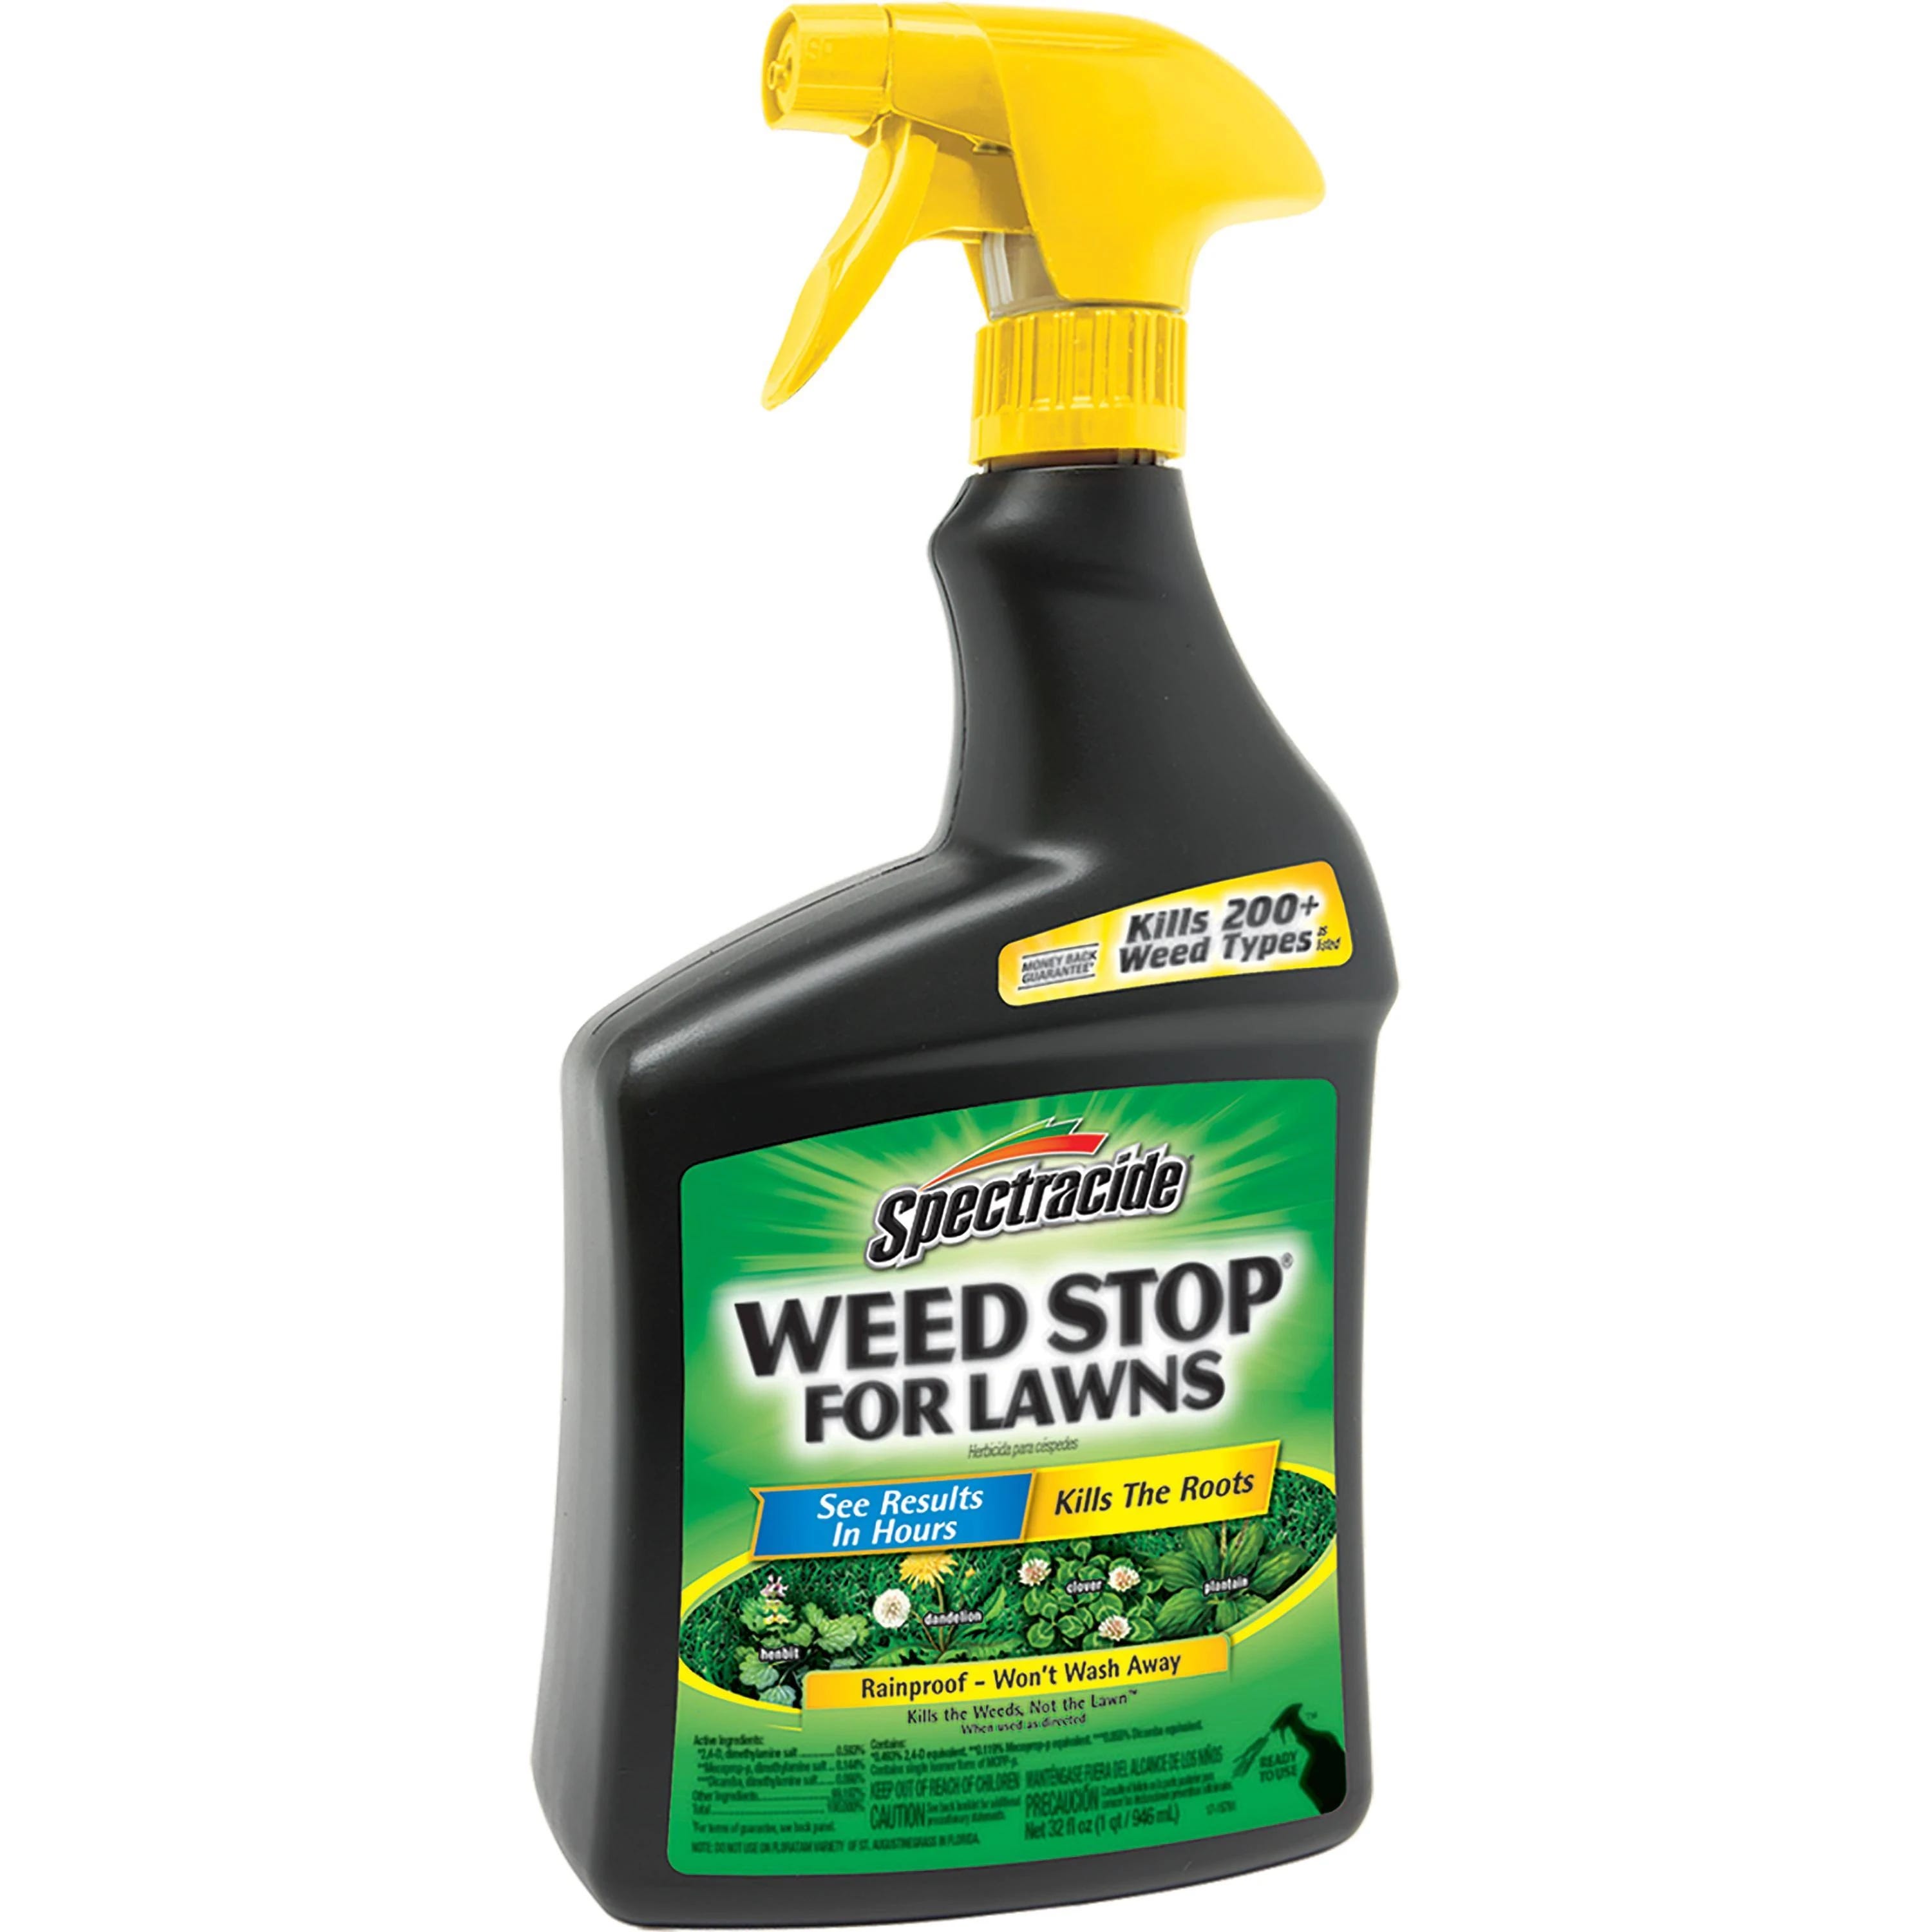 Pet Safe Lawn Weed Killer: Spectracide Weed Stop for Lawns | Image